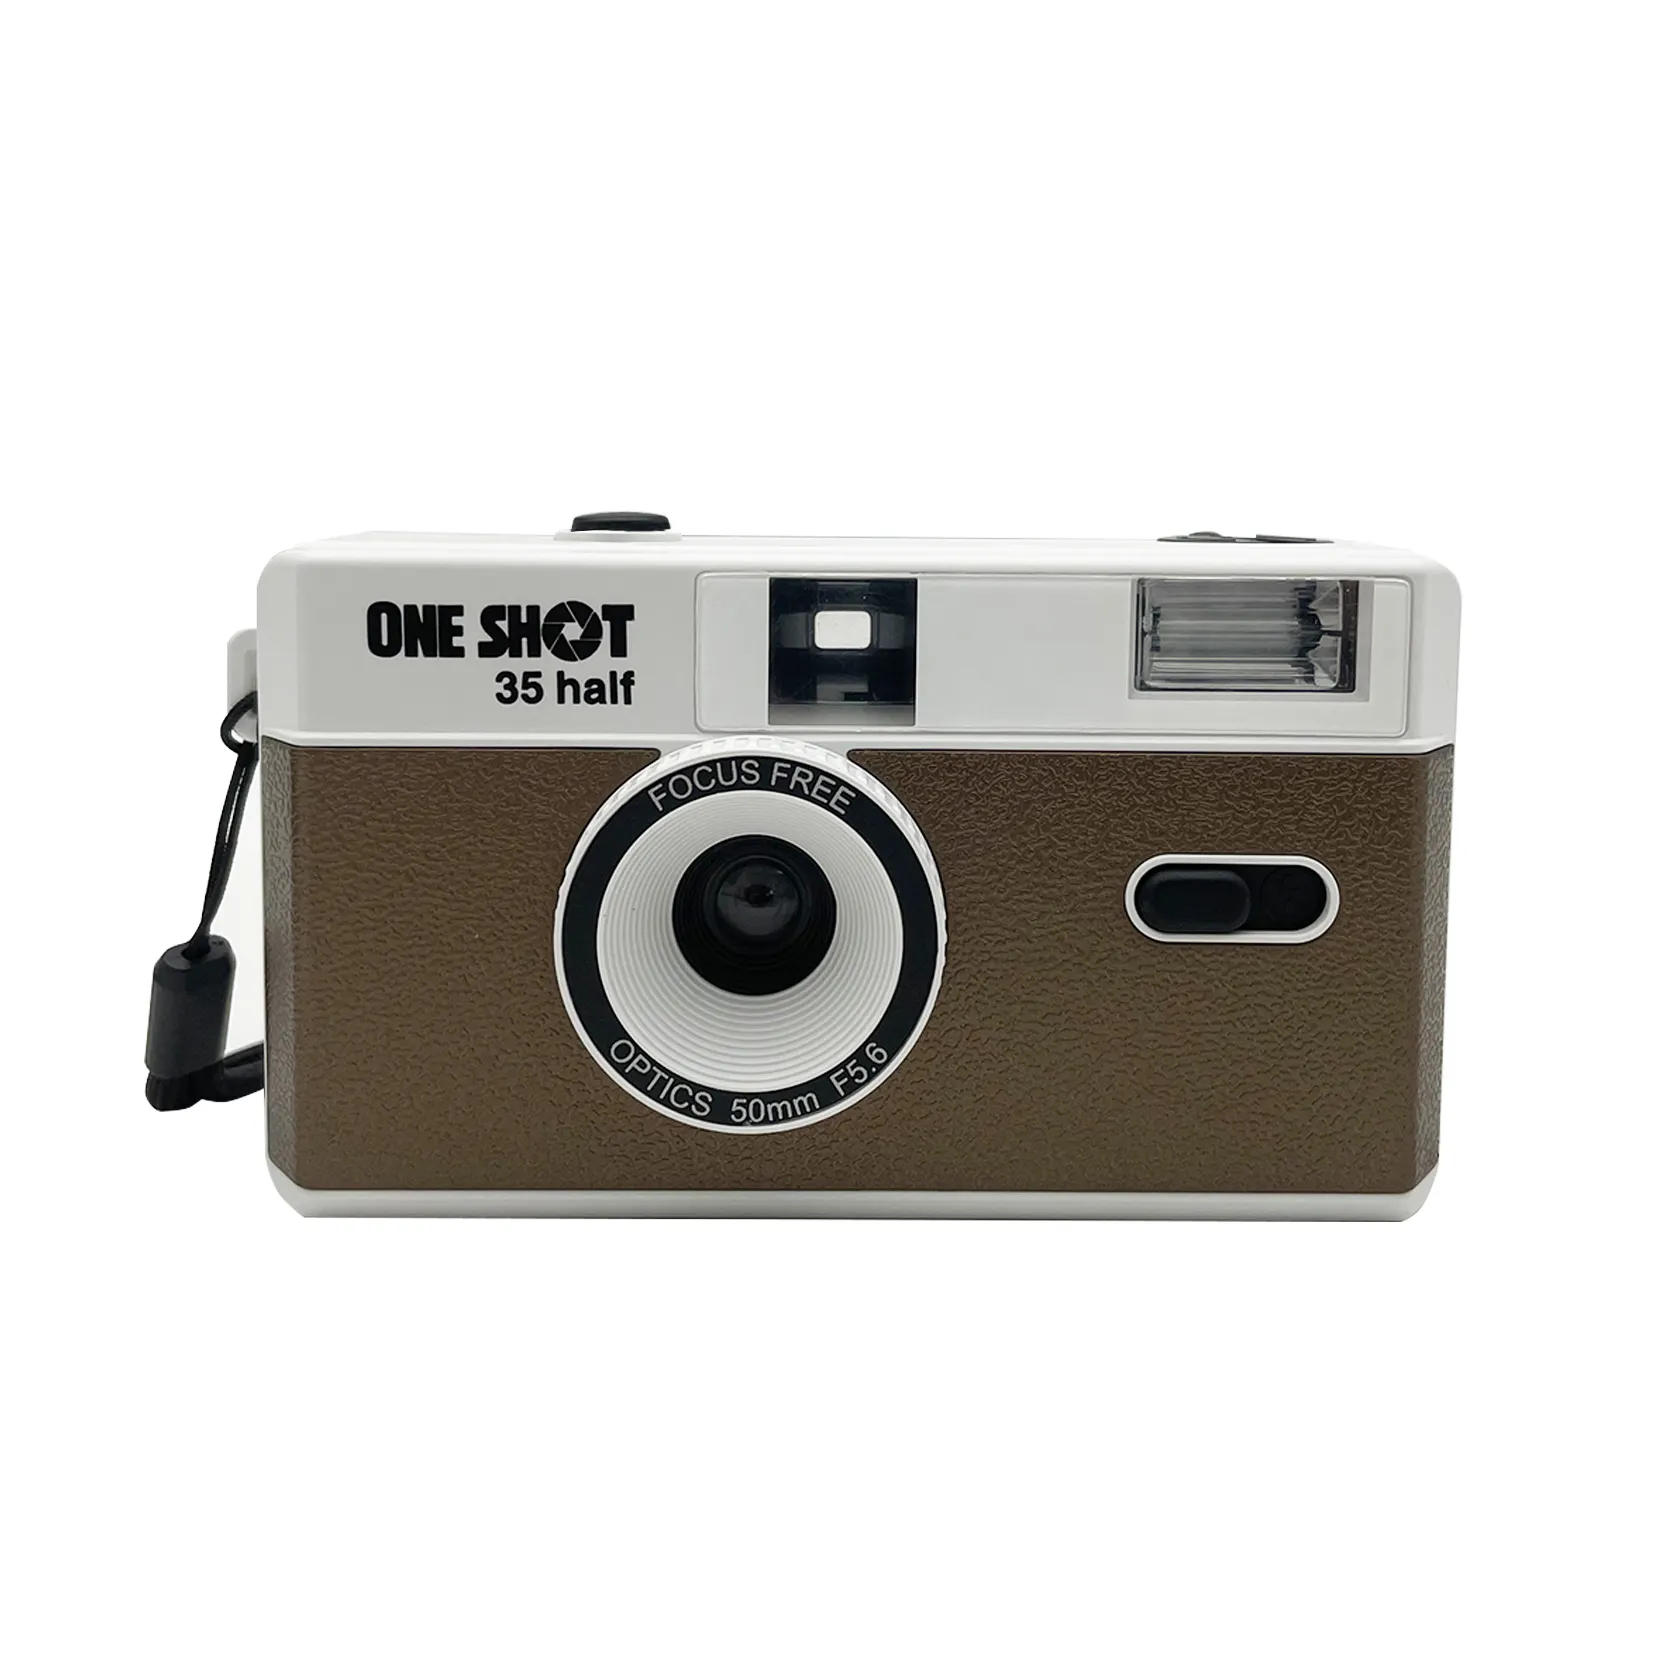 35mm film camera Half frame Best Cheap 35mm Film Camera Reusable Manual Point and Shoot Built in Flash